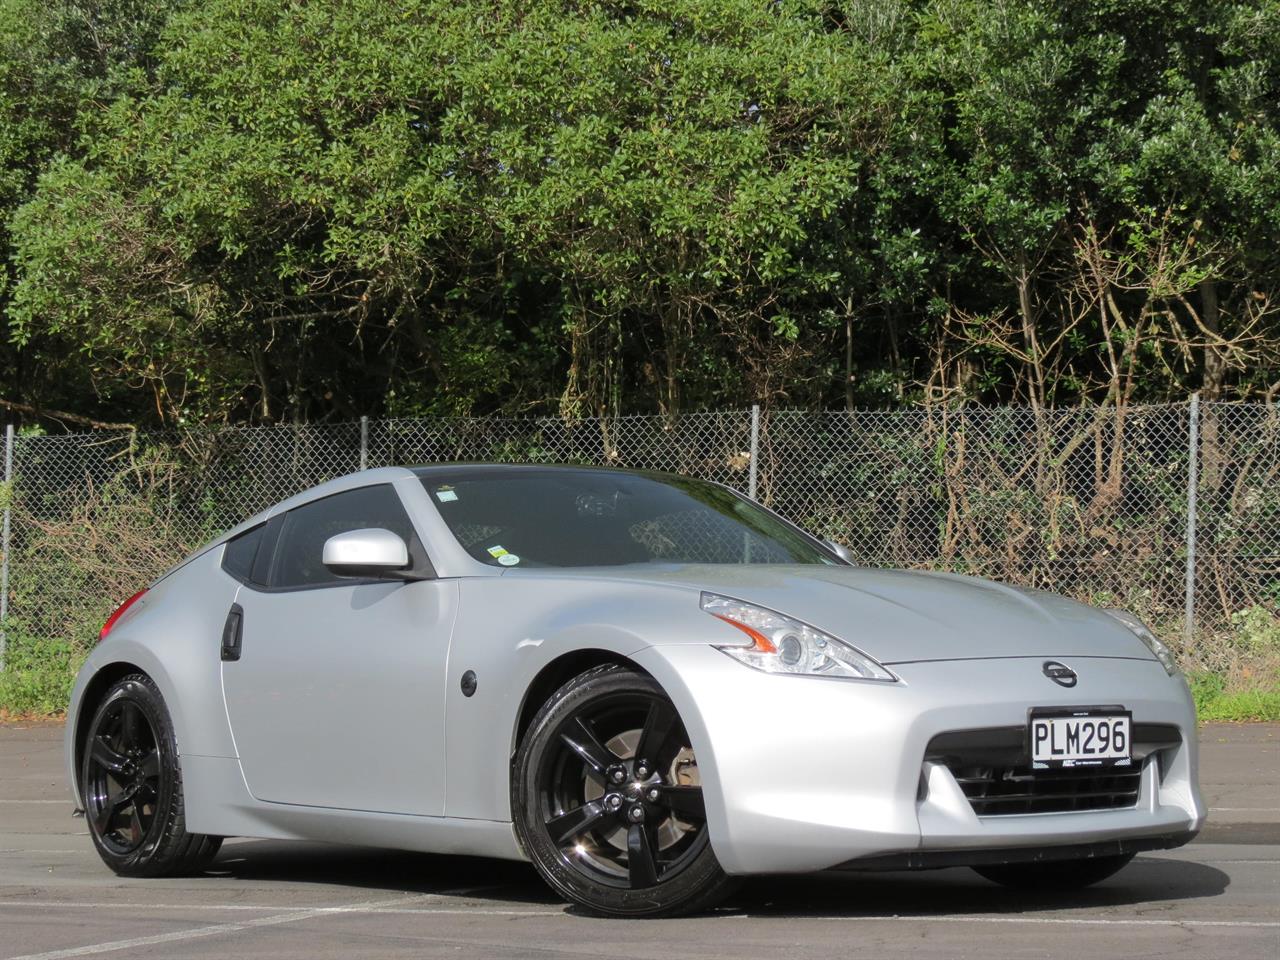 NZC 2009 Nissan FAIRLADY just arrived to Auckland